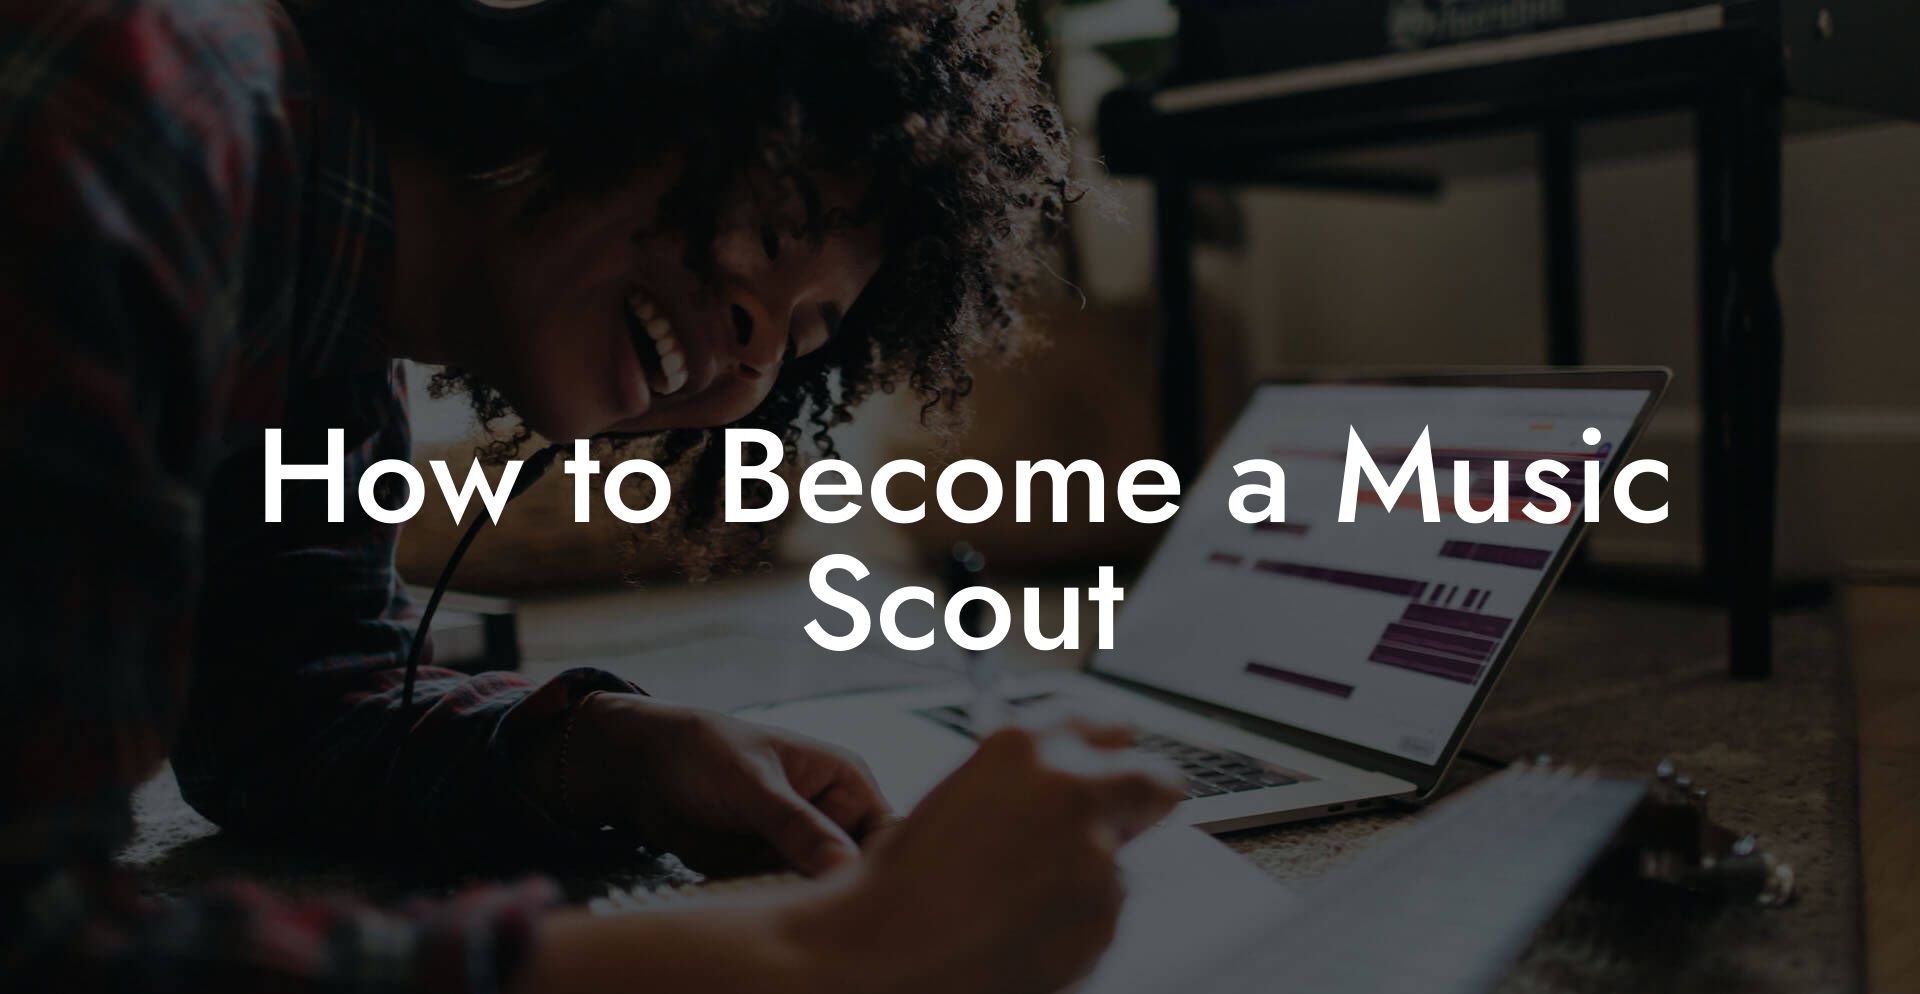 How to Become a Music Scout